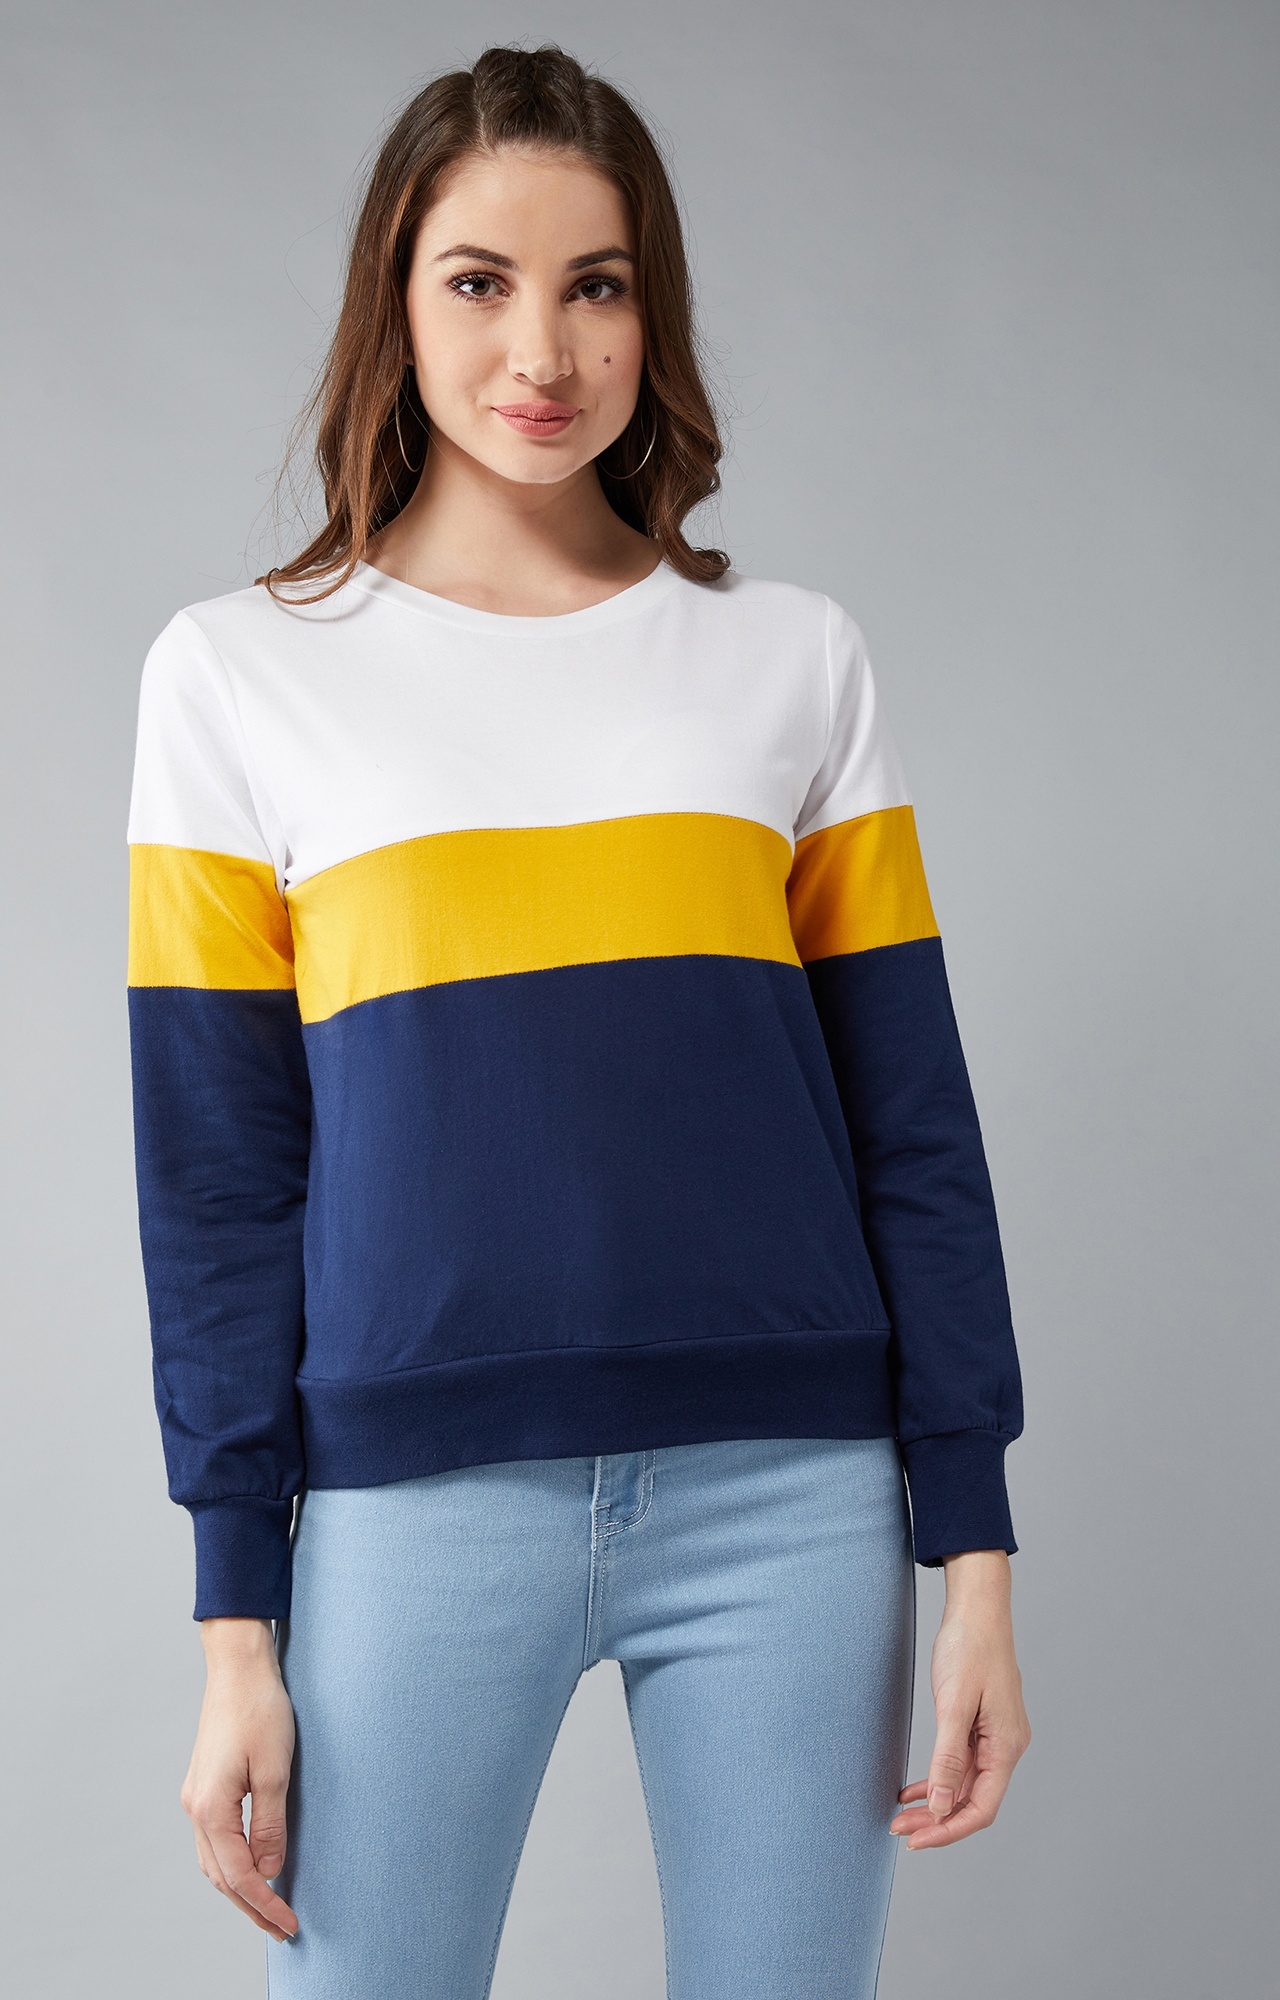 Dolce Crudo | Women's Multicolored With A Navy Blue Base Round Neck Full Sleeves Cotton Solid Colorblock Paneled Boxy Sweatshirt